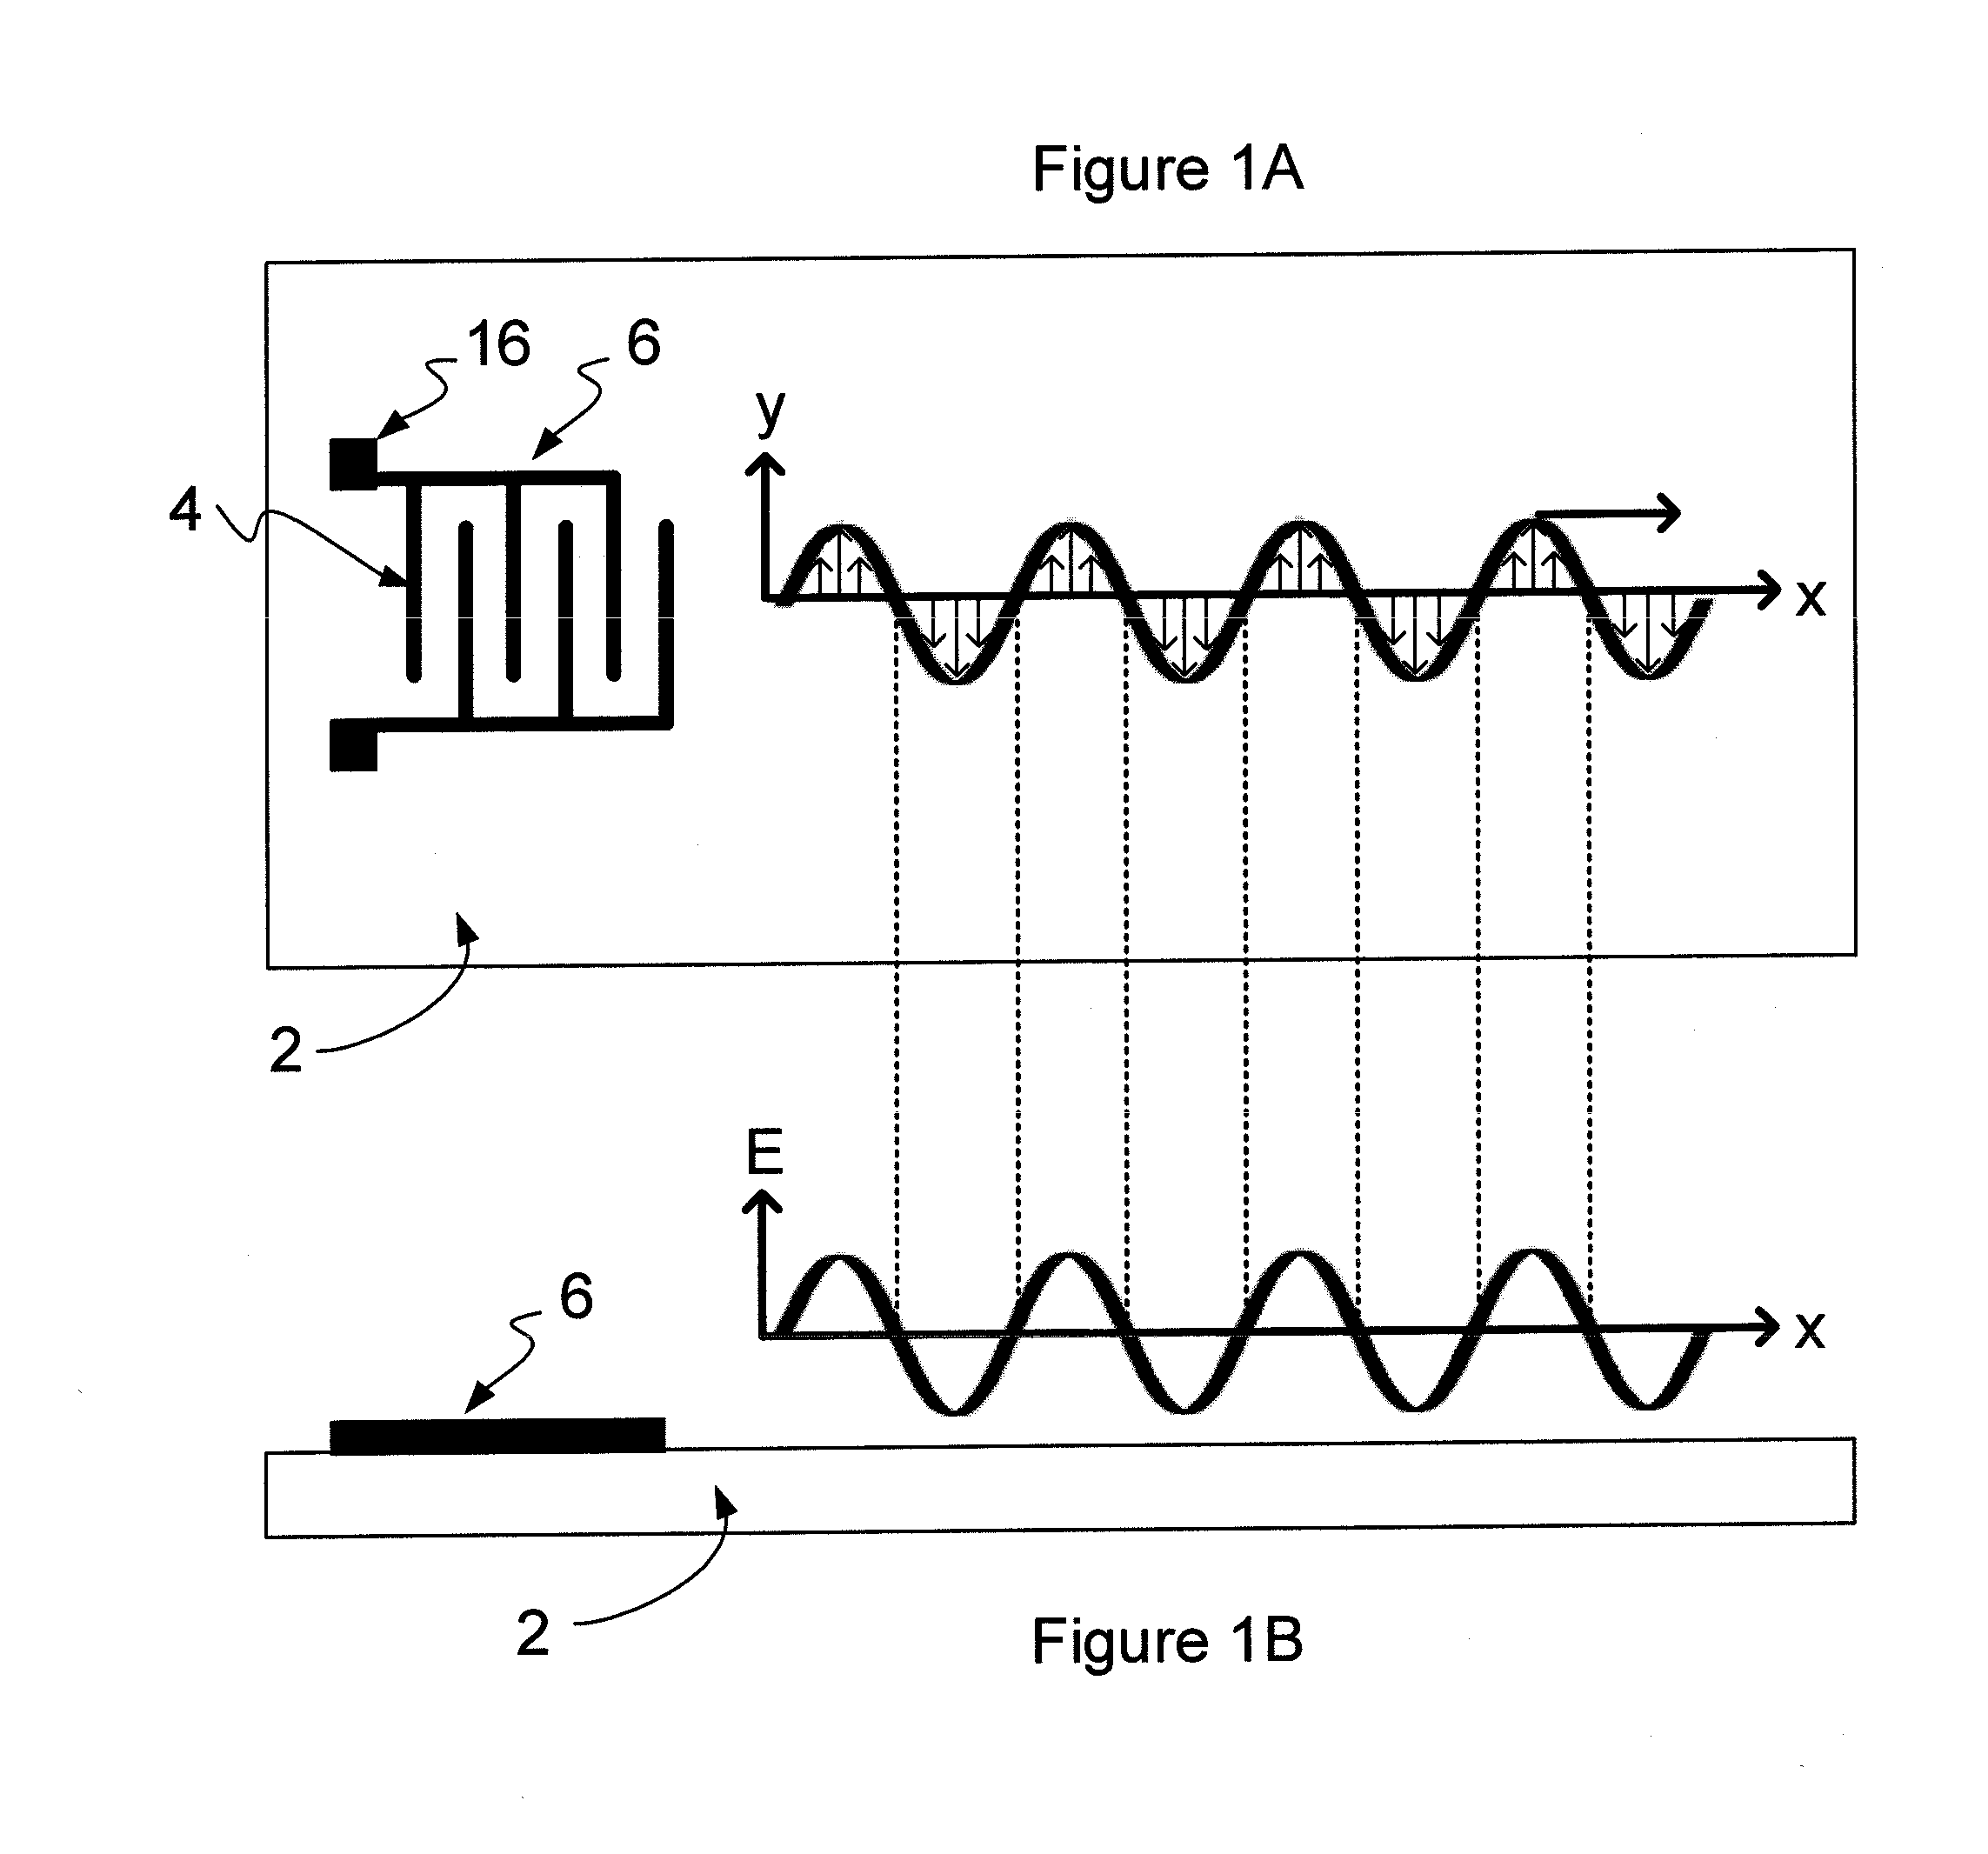 Method and apparatus for manipulating particles